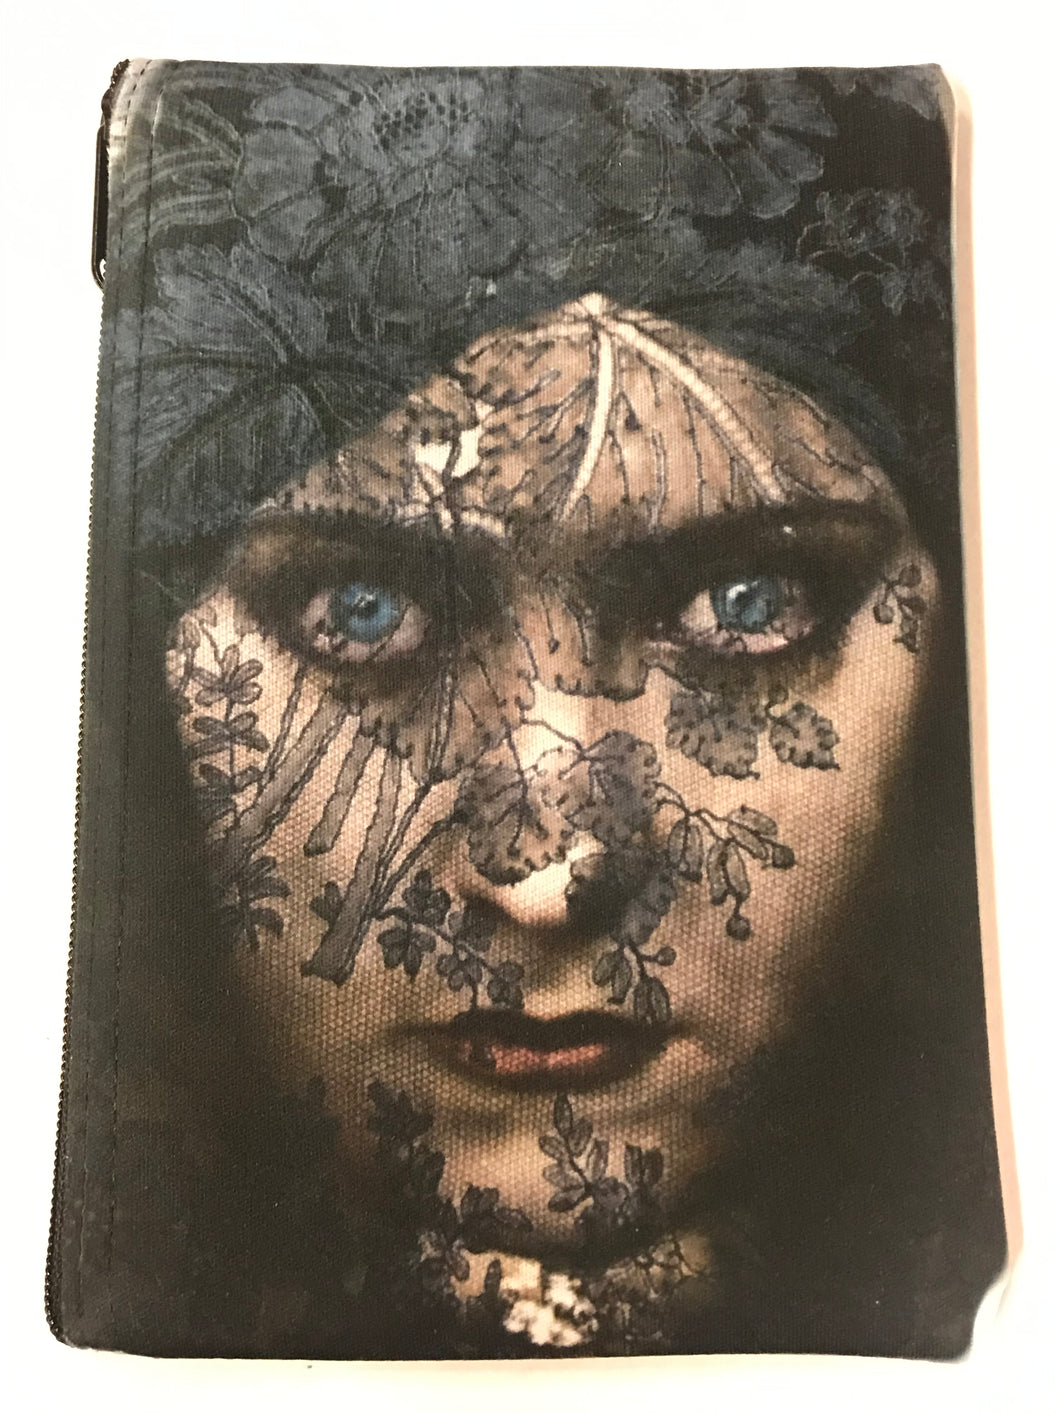 Blue Eyed Woman With Lace Veil Print Pouch